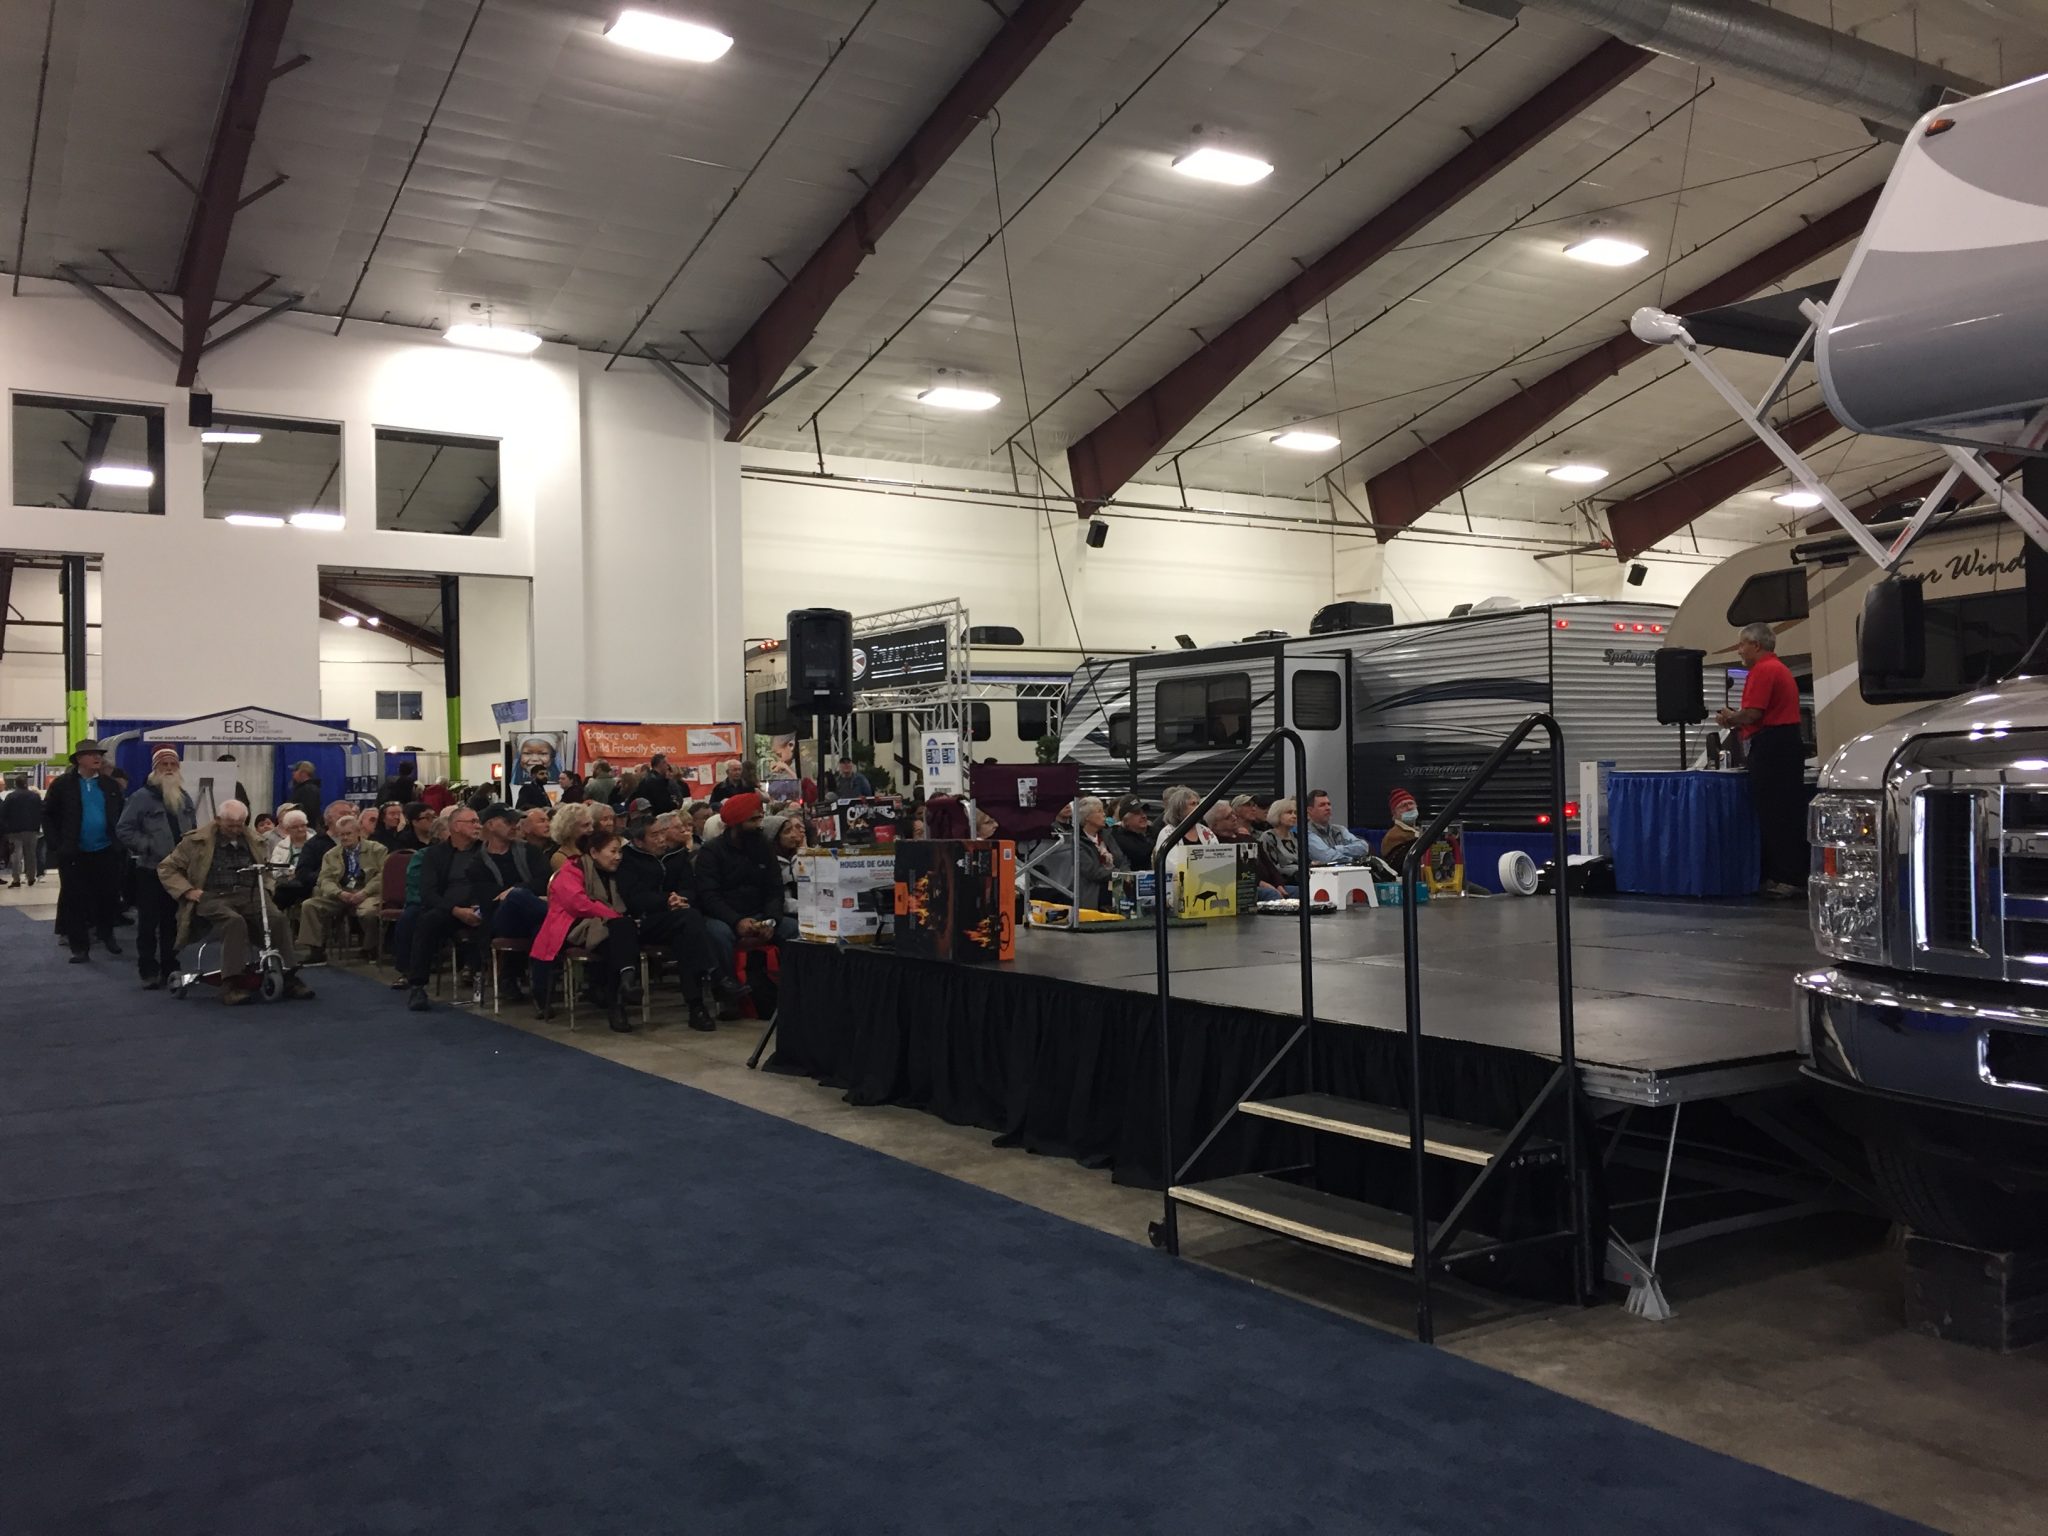 2019 Earlybird RV Show & Sale Returns to Tradex in Abbotsford